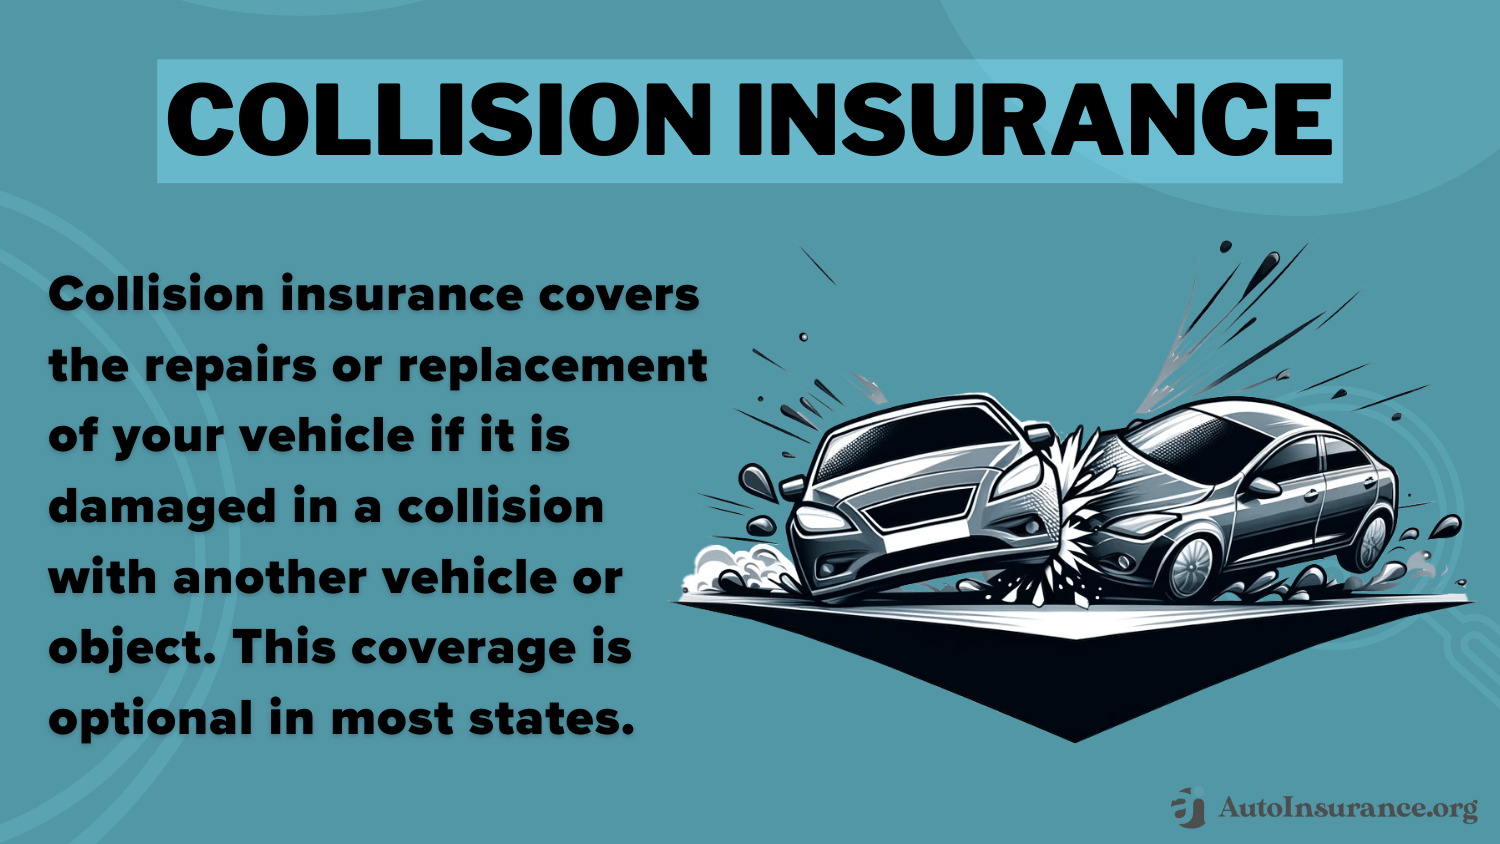 Collision Insurance Definition Card: Does auto insurance cover hitting a pole?